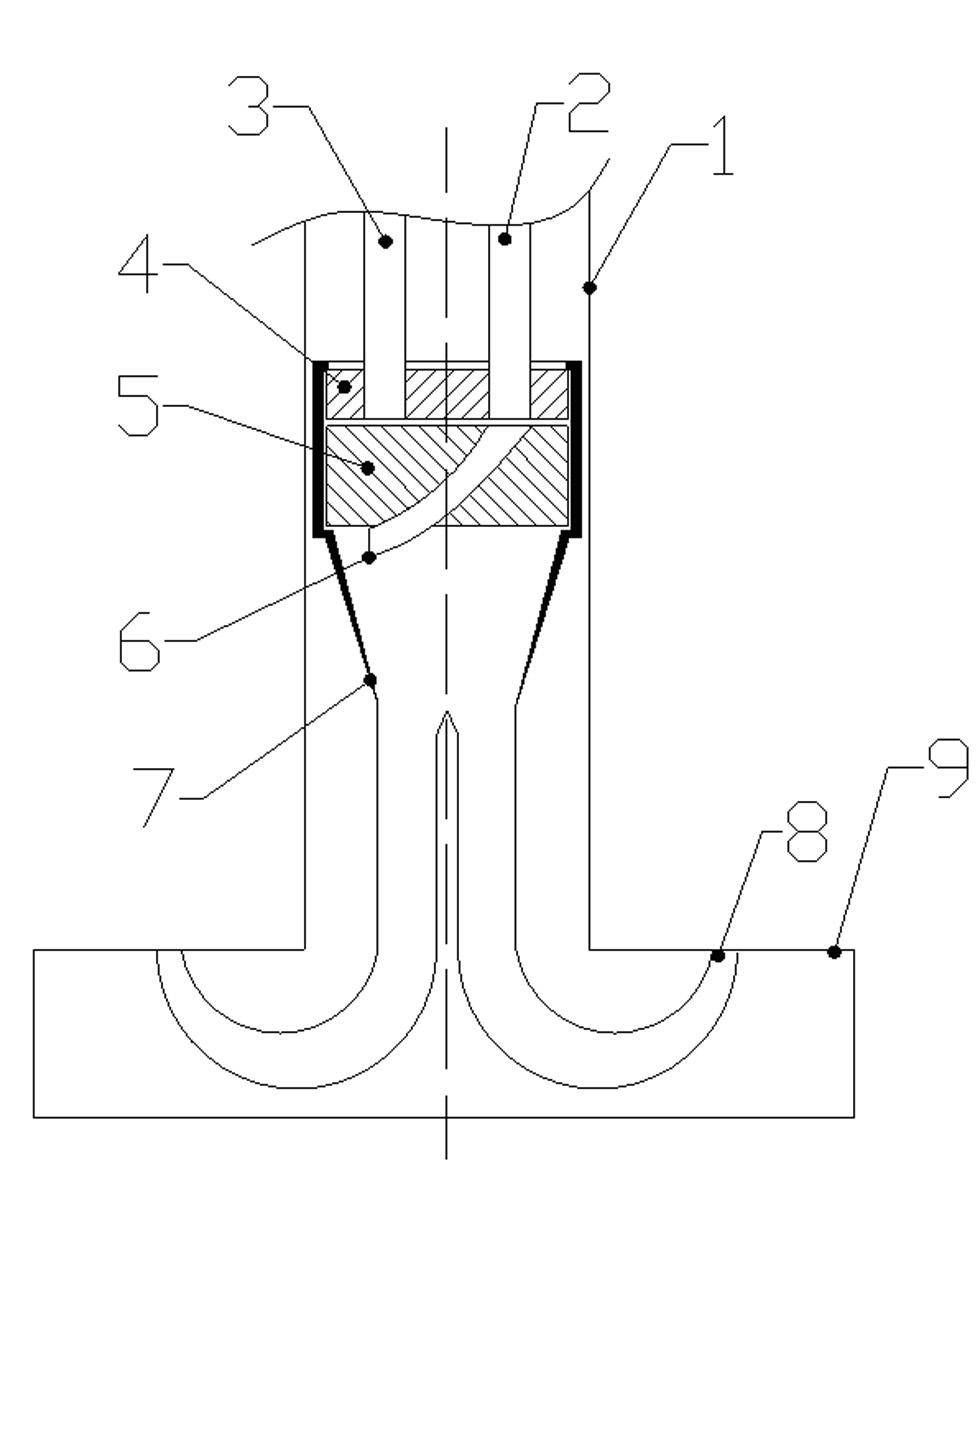 Gas-liquid two-phase flow jetting pile shoe